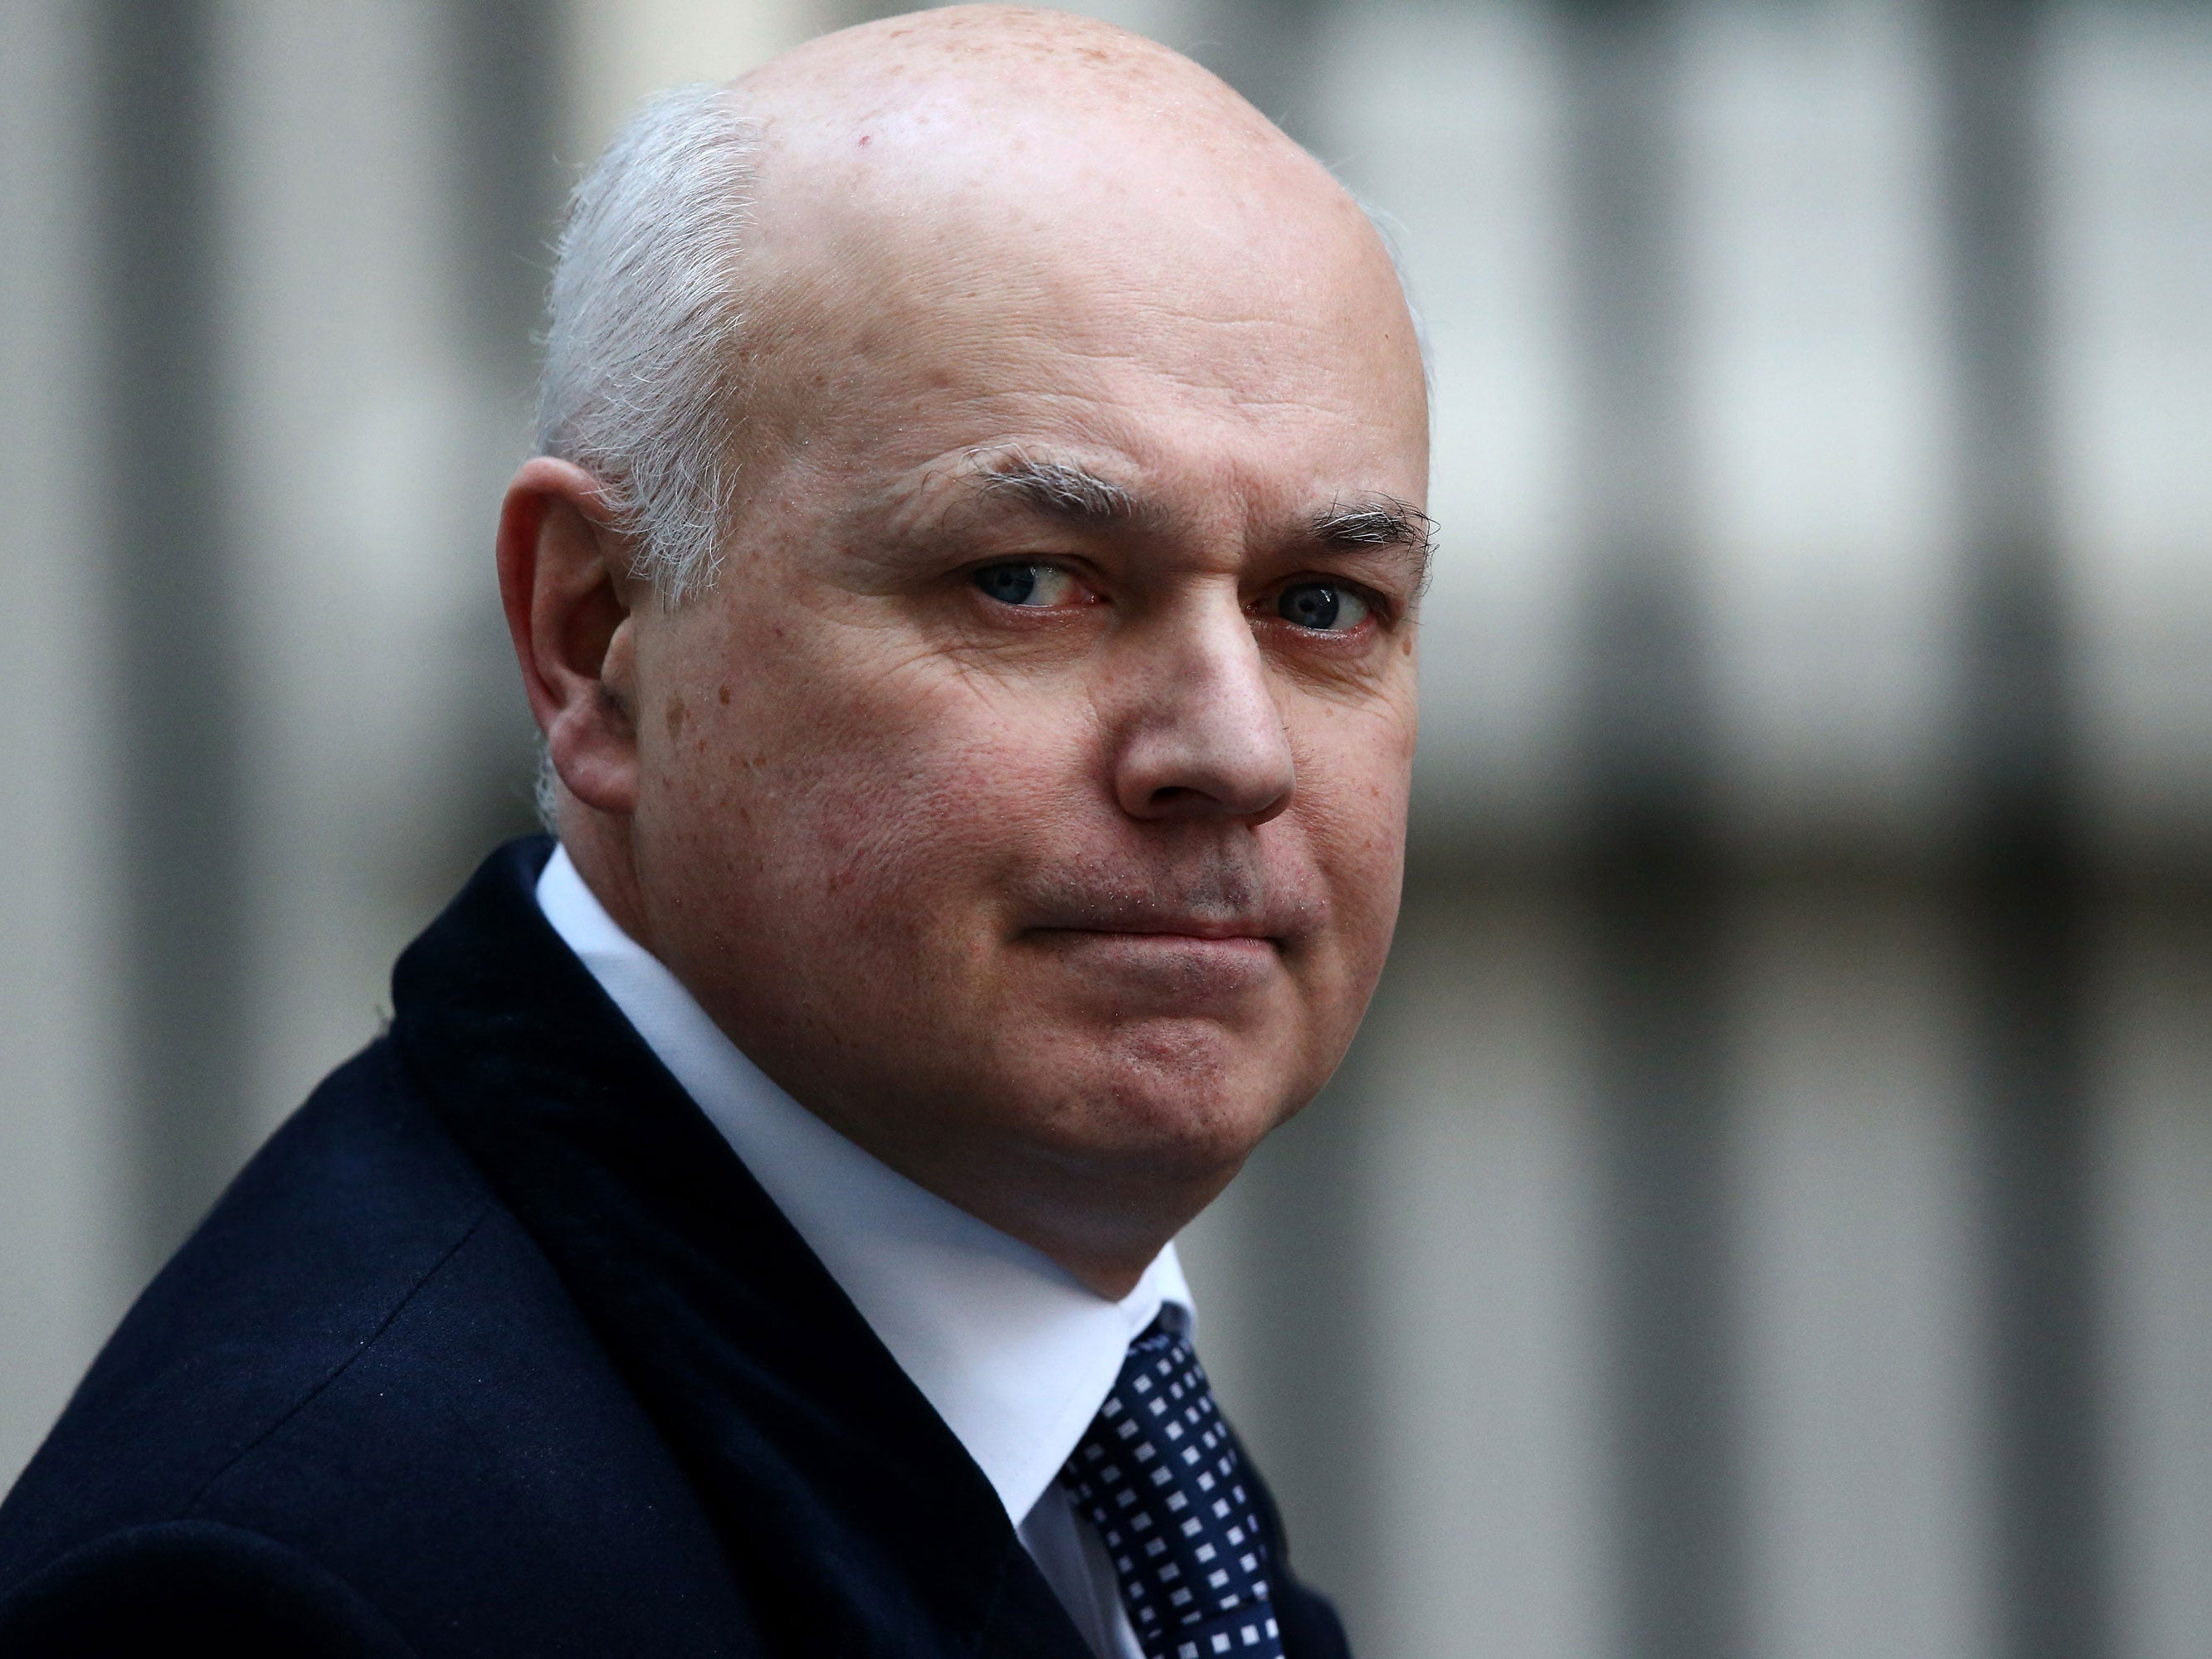 Campaigners say that disabled people have been disproportionately hit by Iain Duncan Smith's welfare reforms